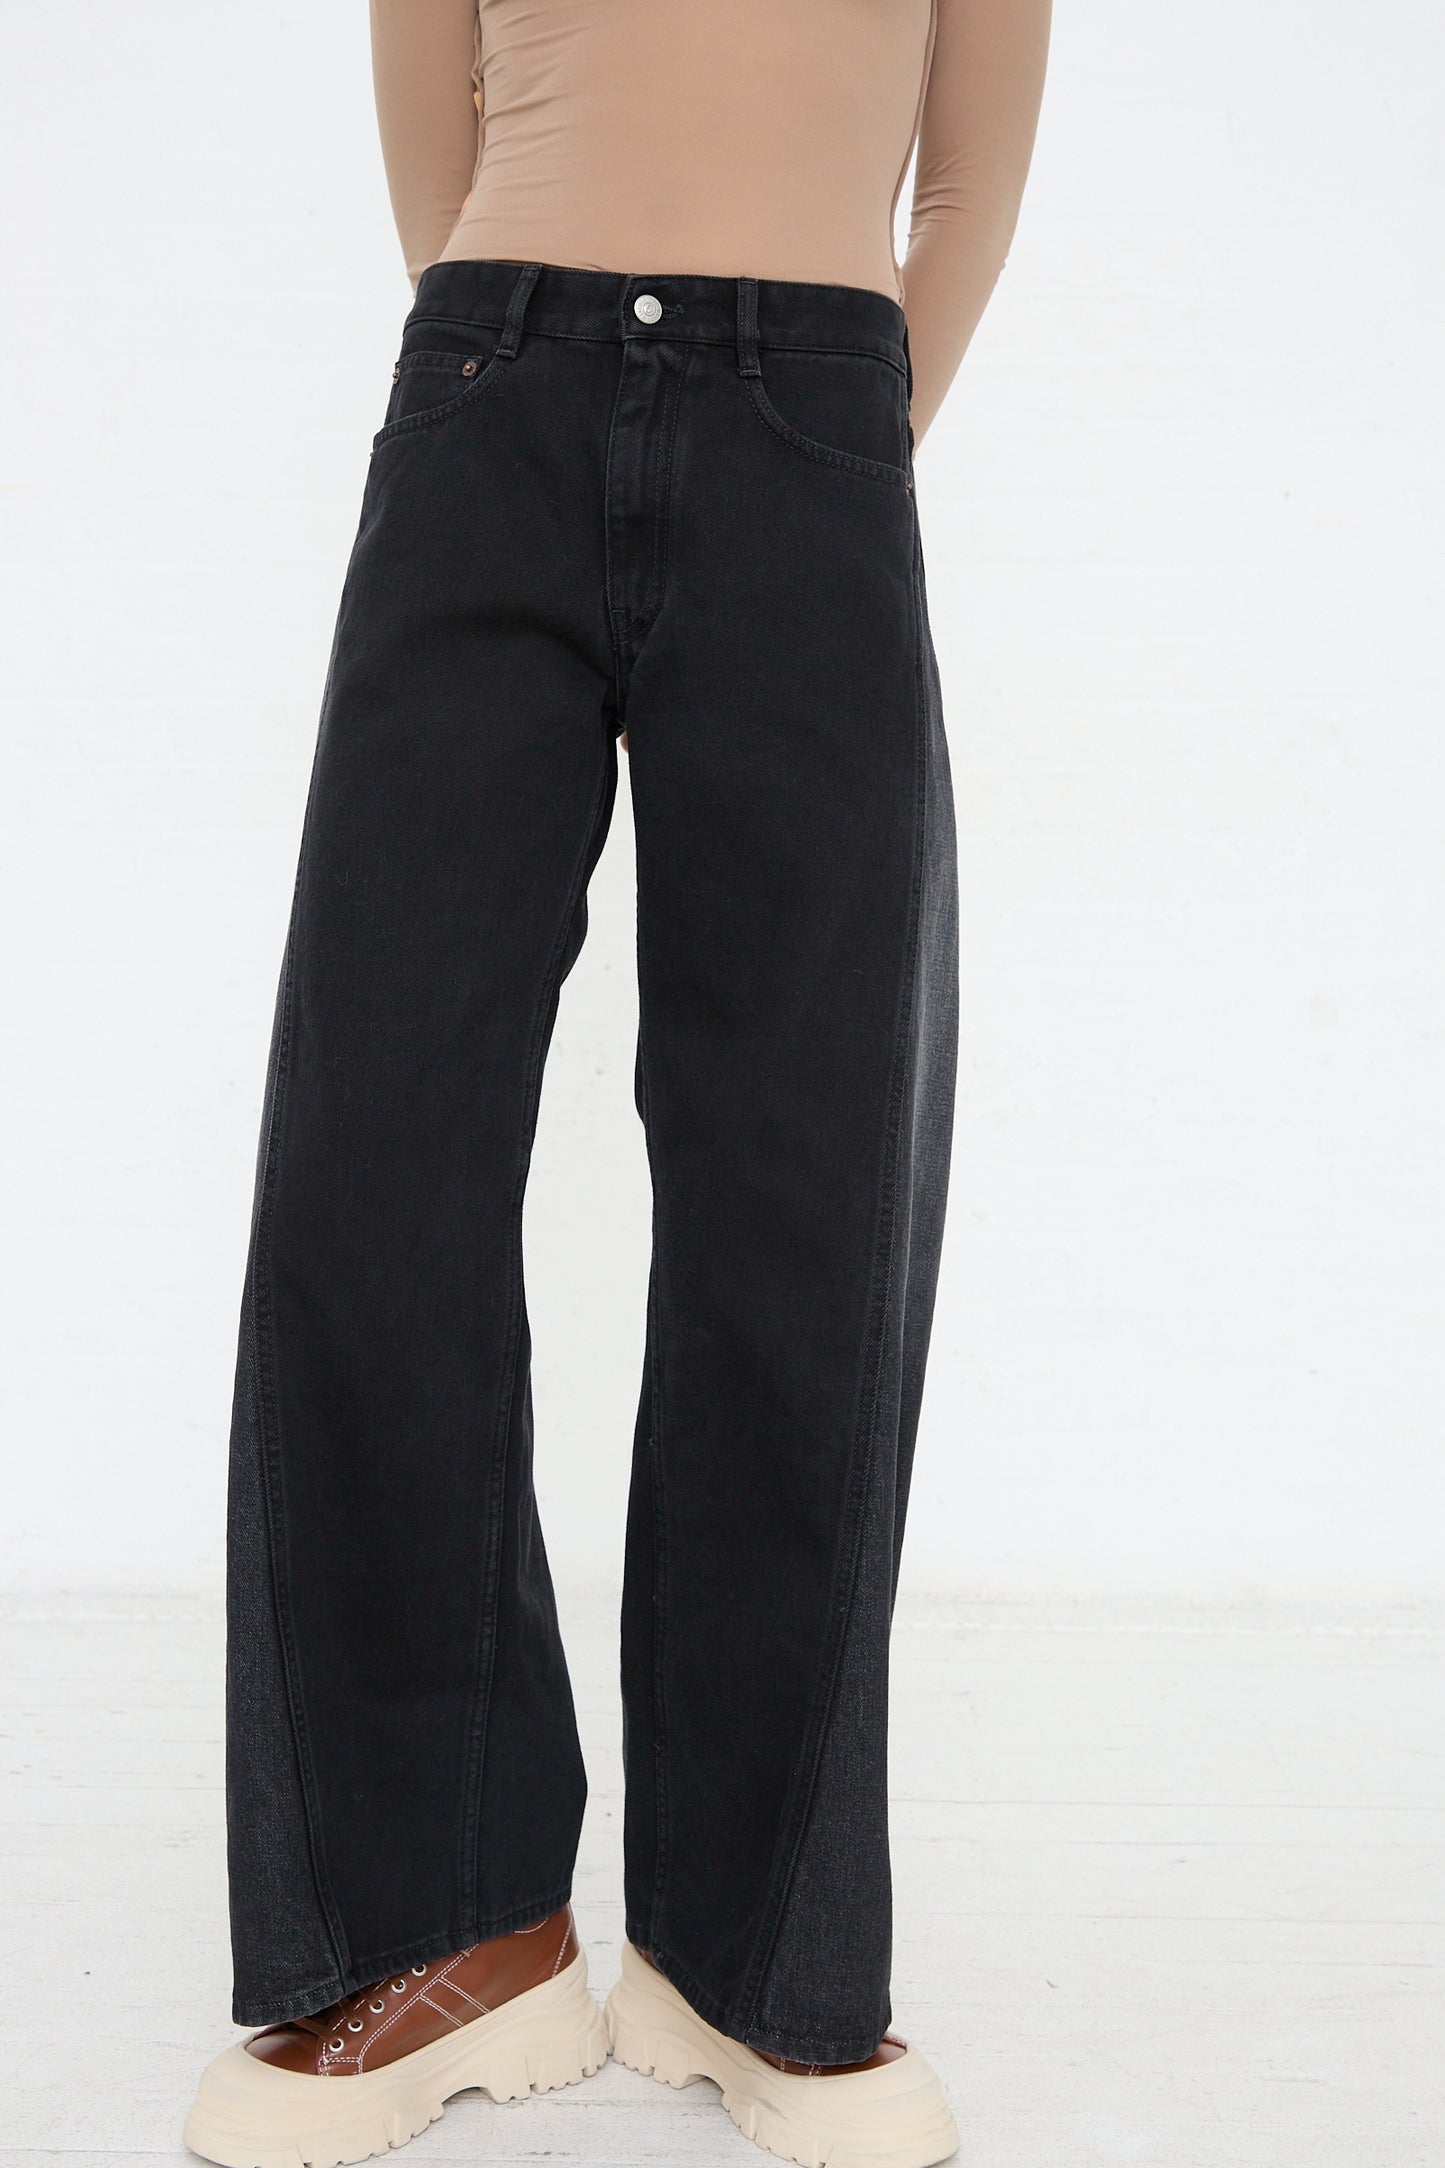 Person wearing high-waisted, wide-leg black MM6 5 Pocket Pant jeans and beige Maison Martin Margiela shoes.